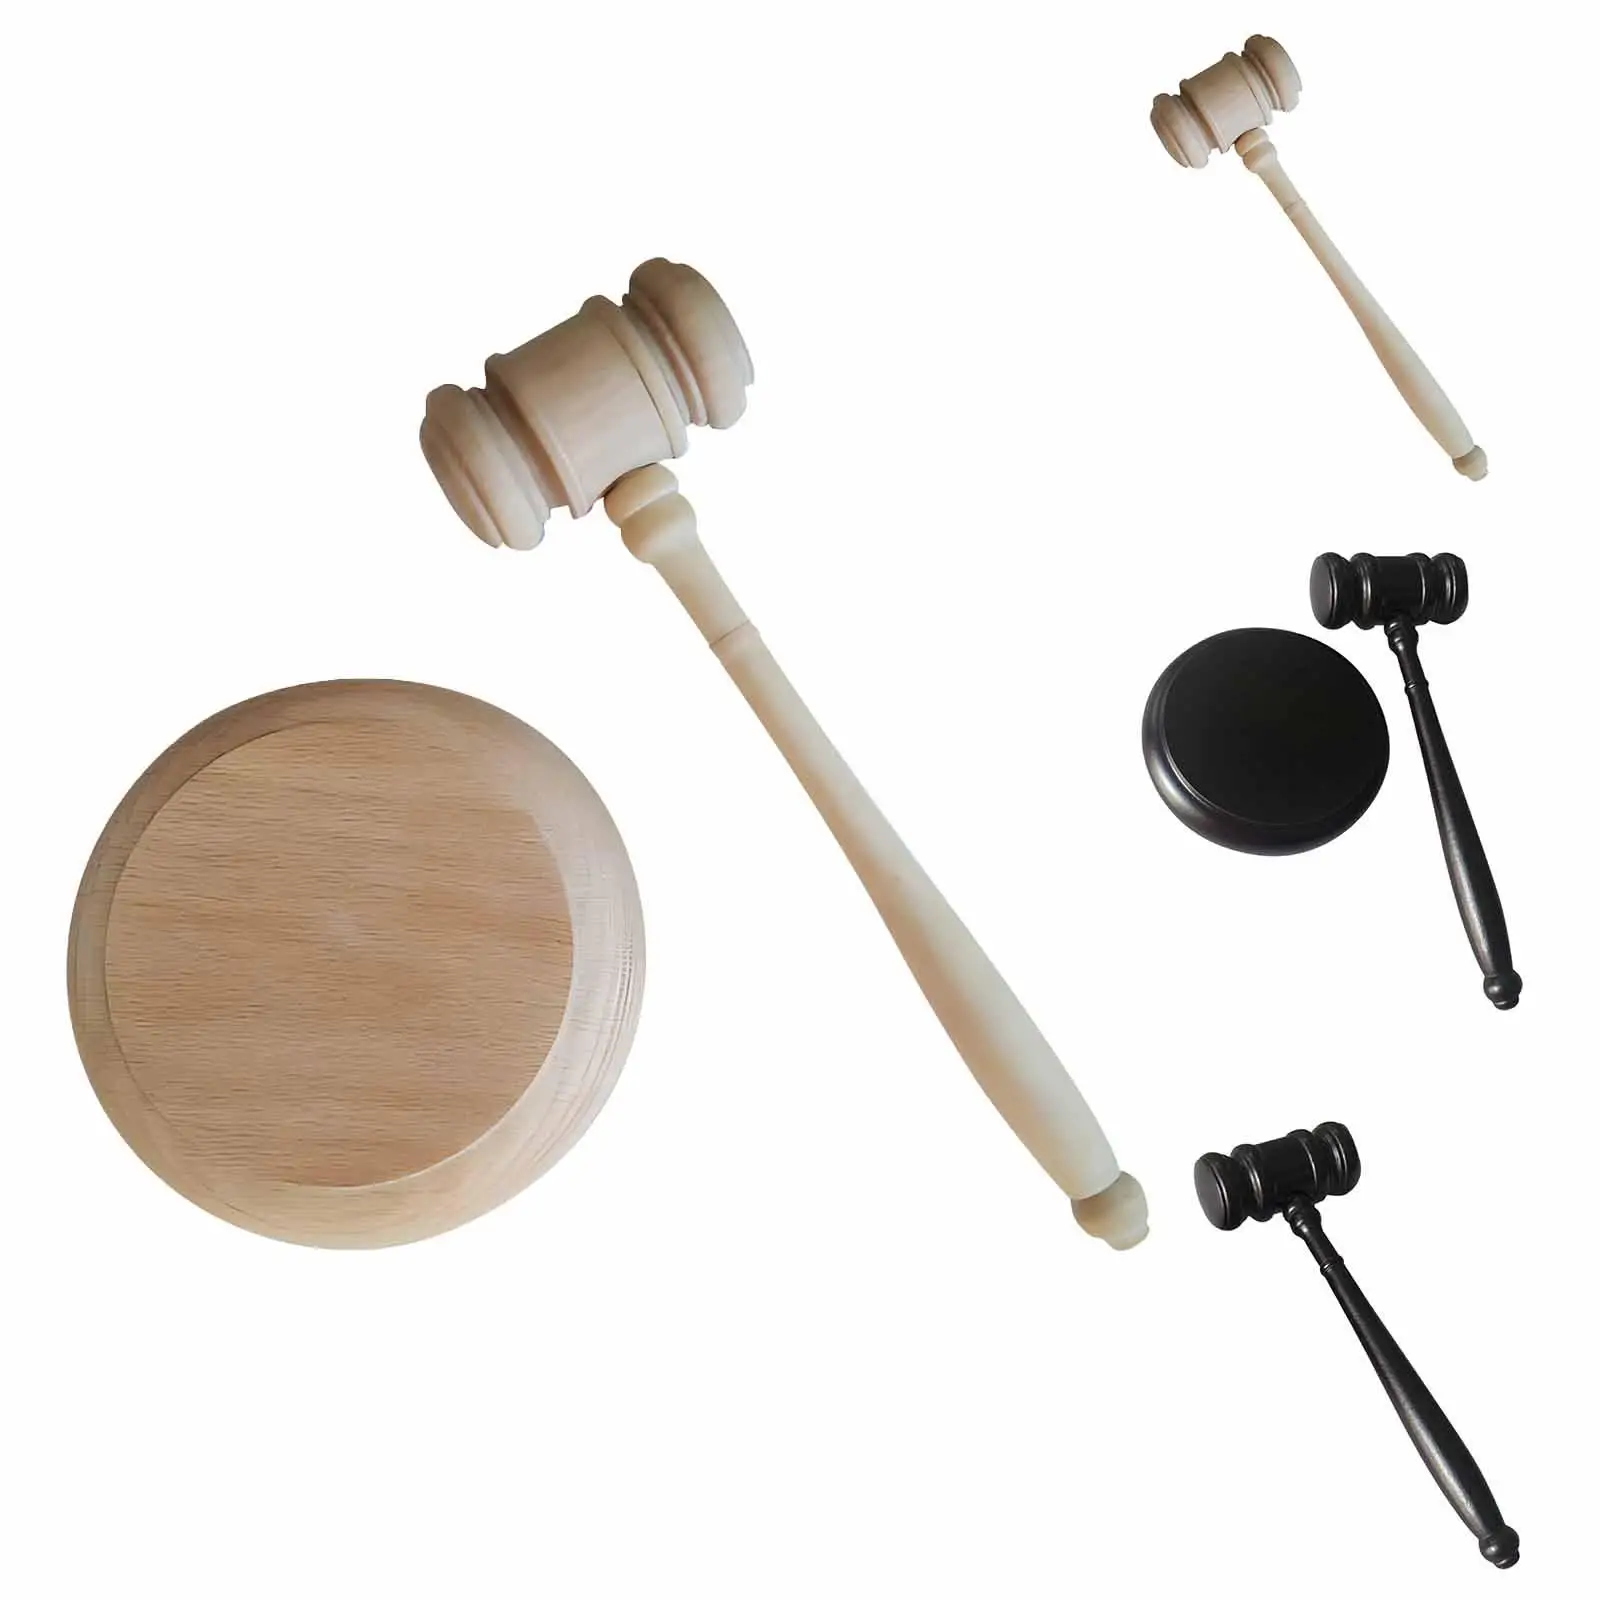 Wooden Gavel and Block Set 21cm Mallet Handmade Judge Gavels Hand Hammer Auction Mallet Toy for Meeting Courtroom Students Judge